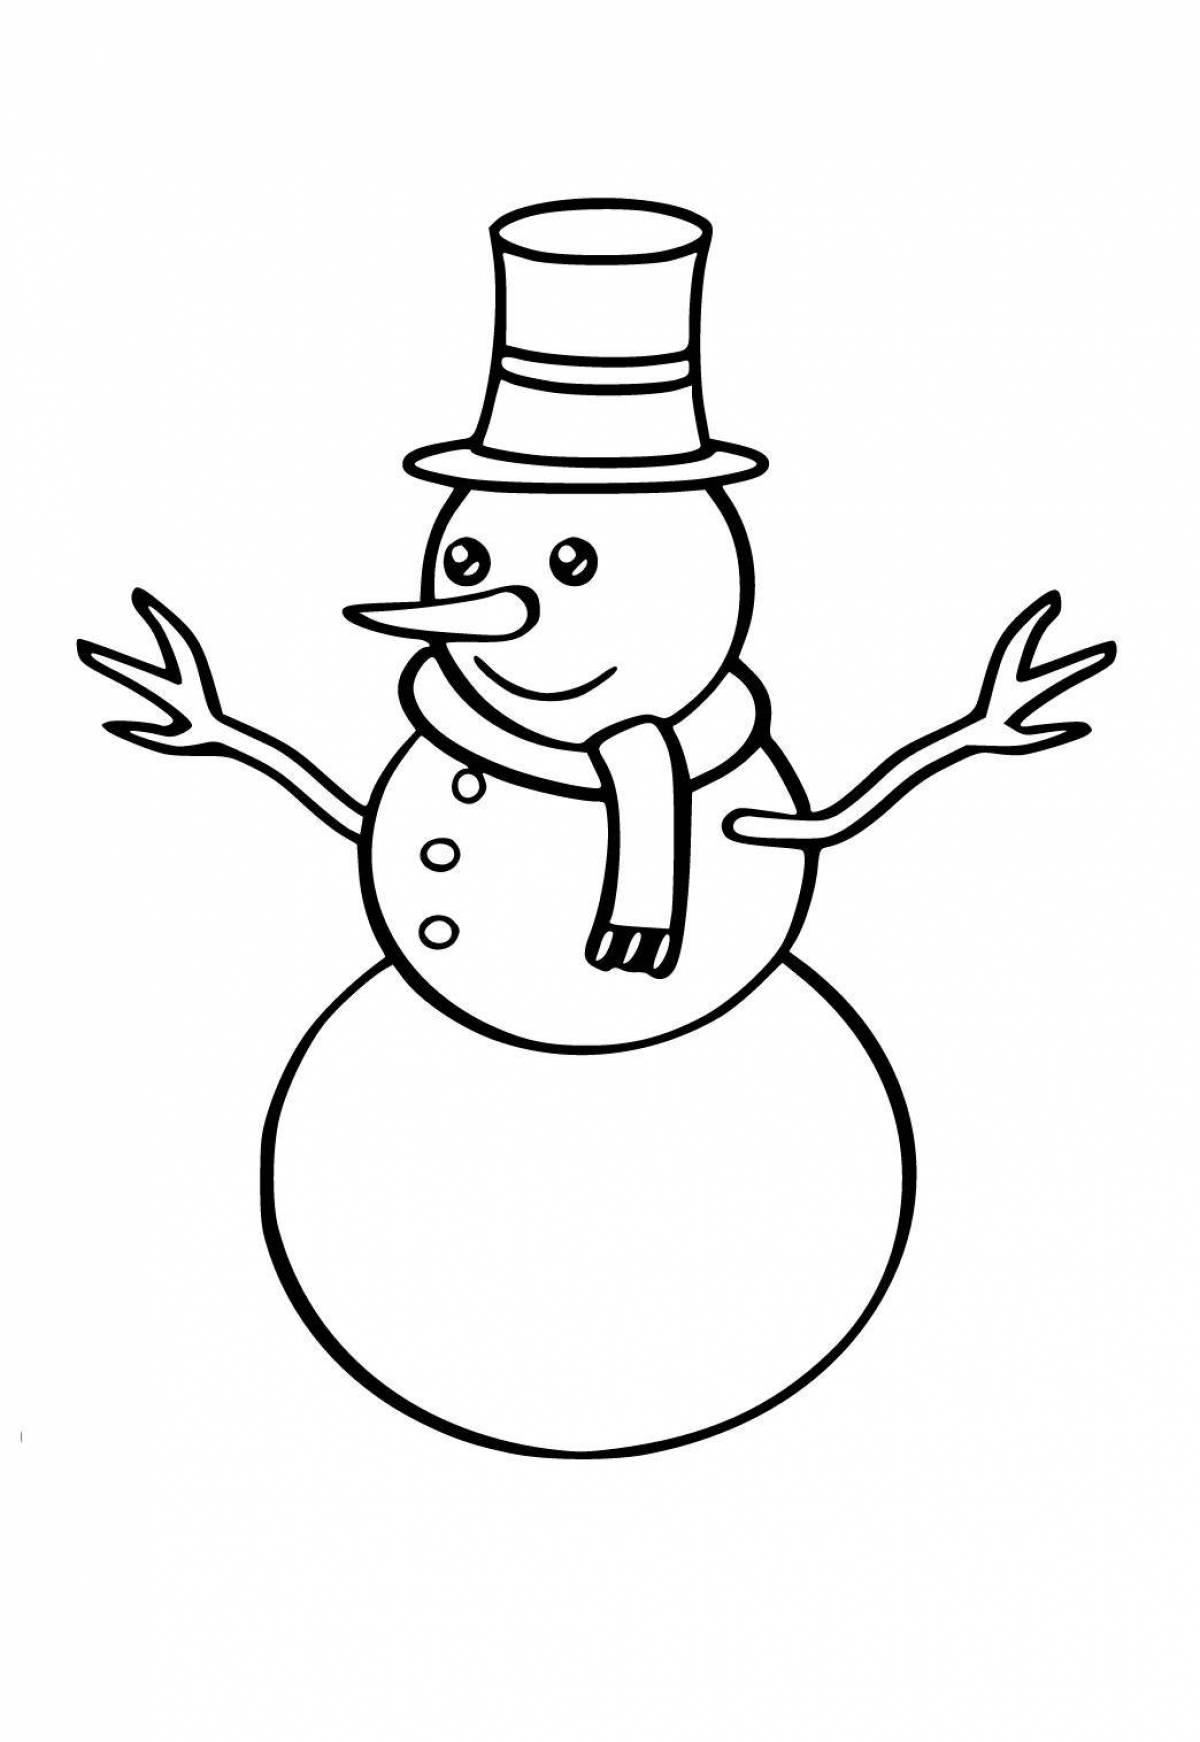 Funny snowman coloring book for kids 6-7 years old